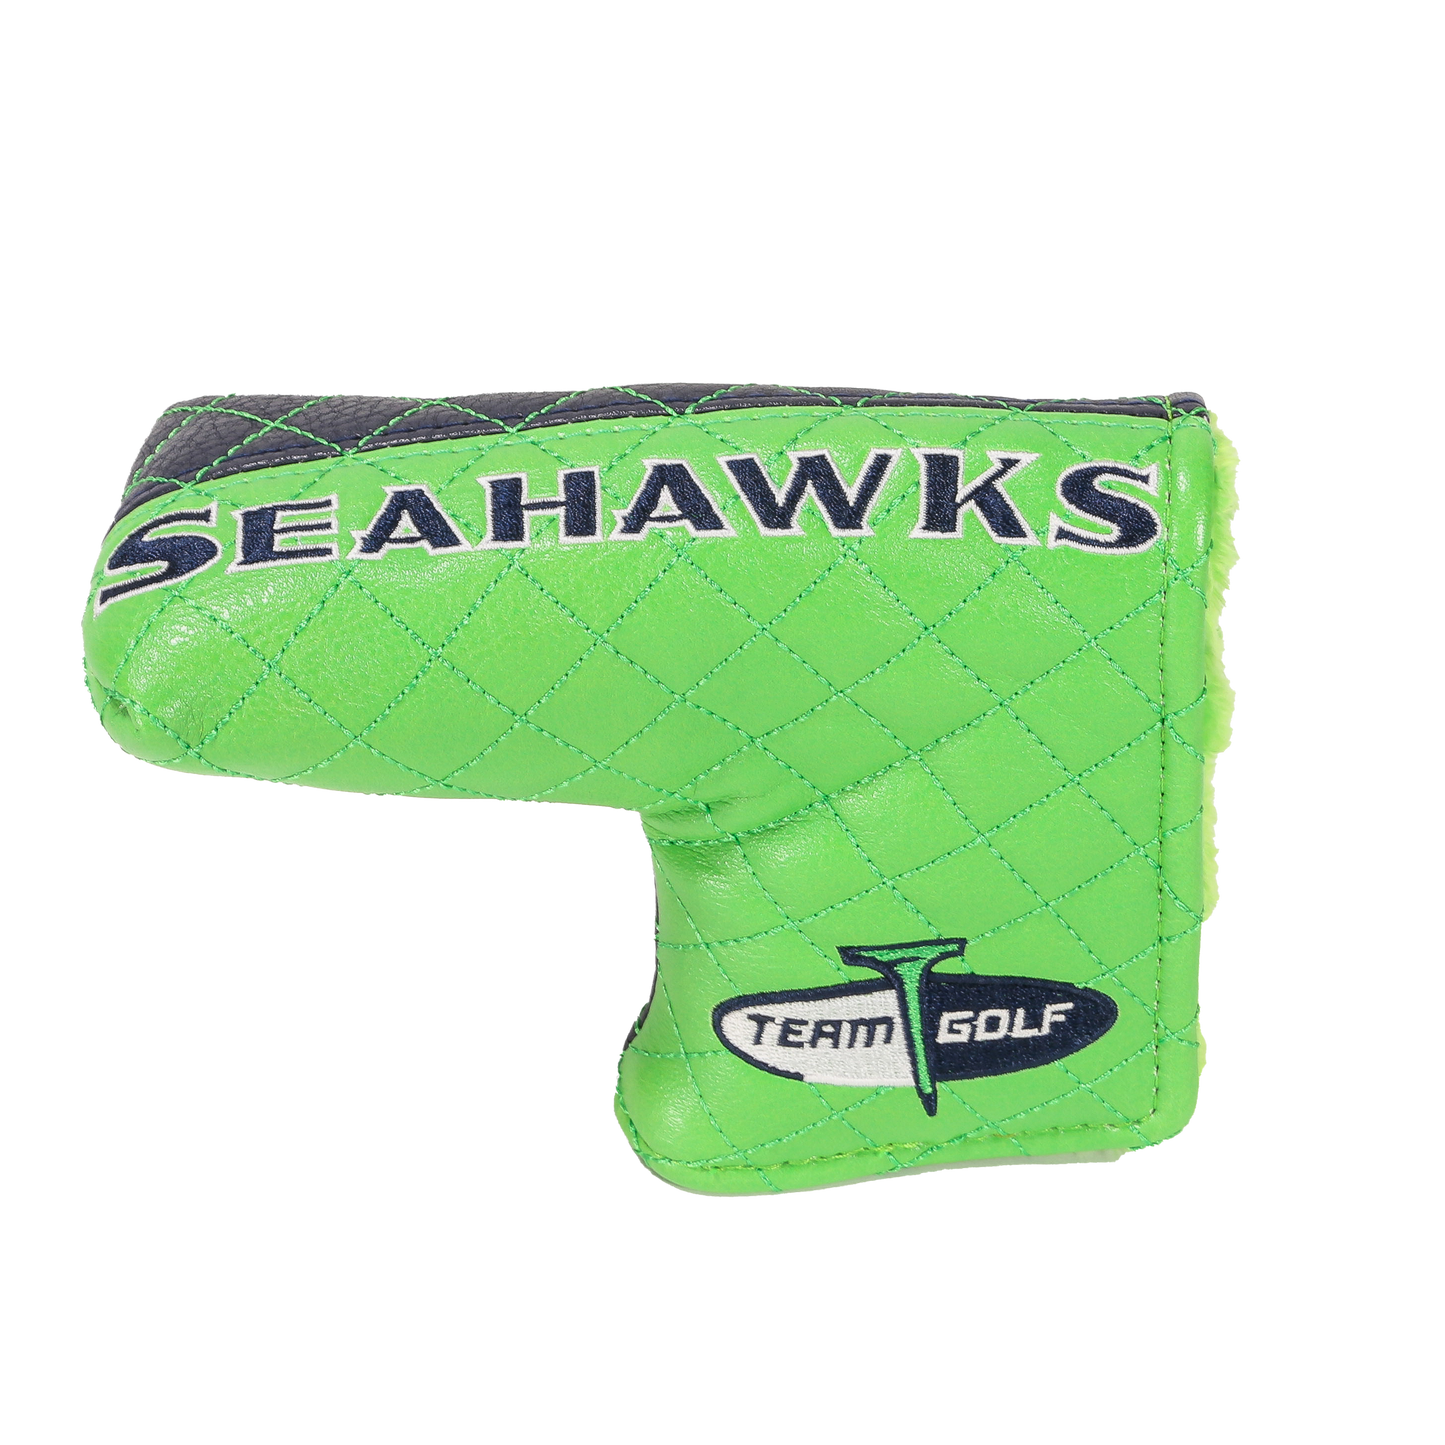 Seattle "Seahawks" Blade Putter Cover